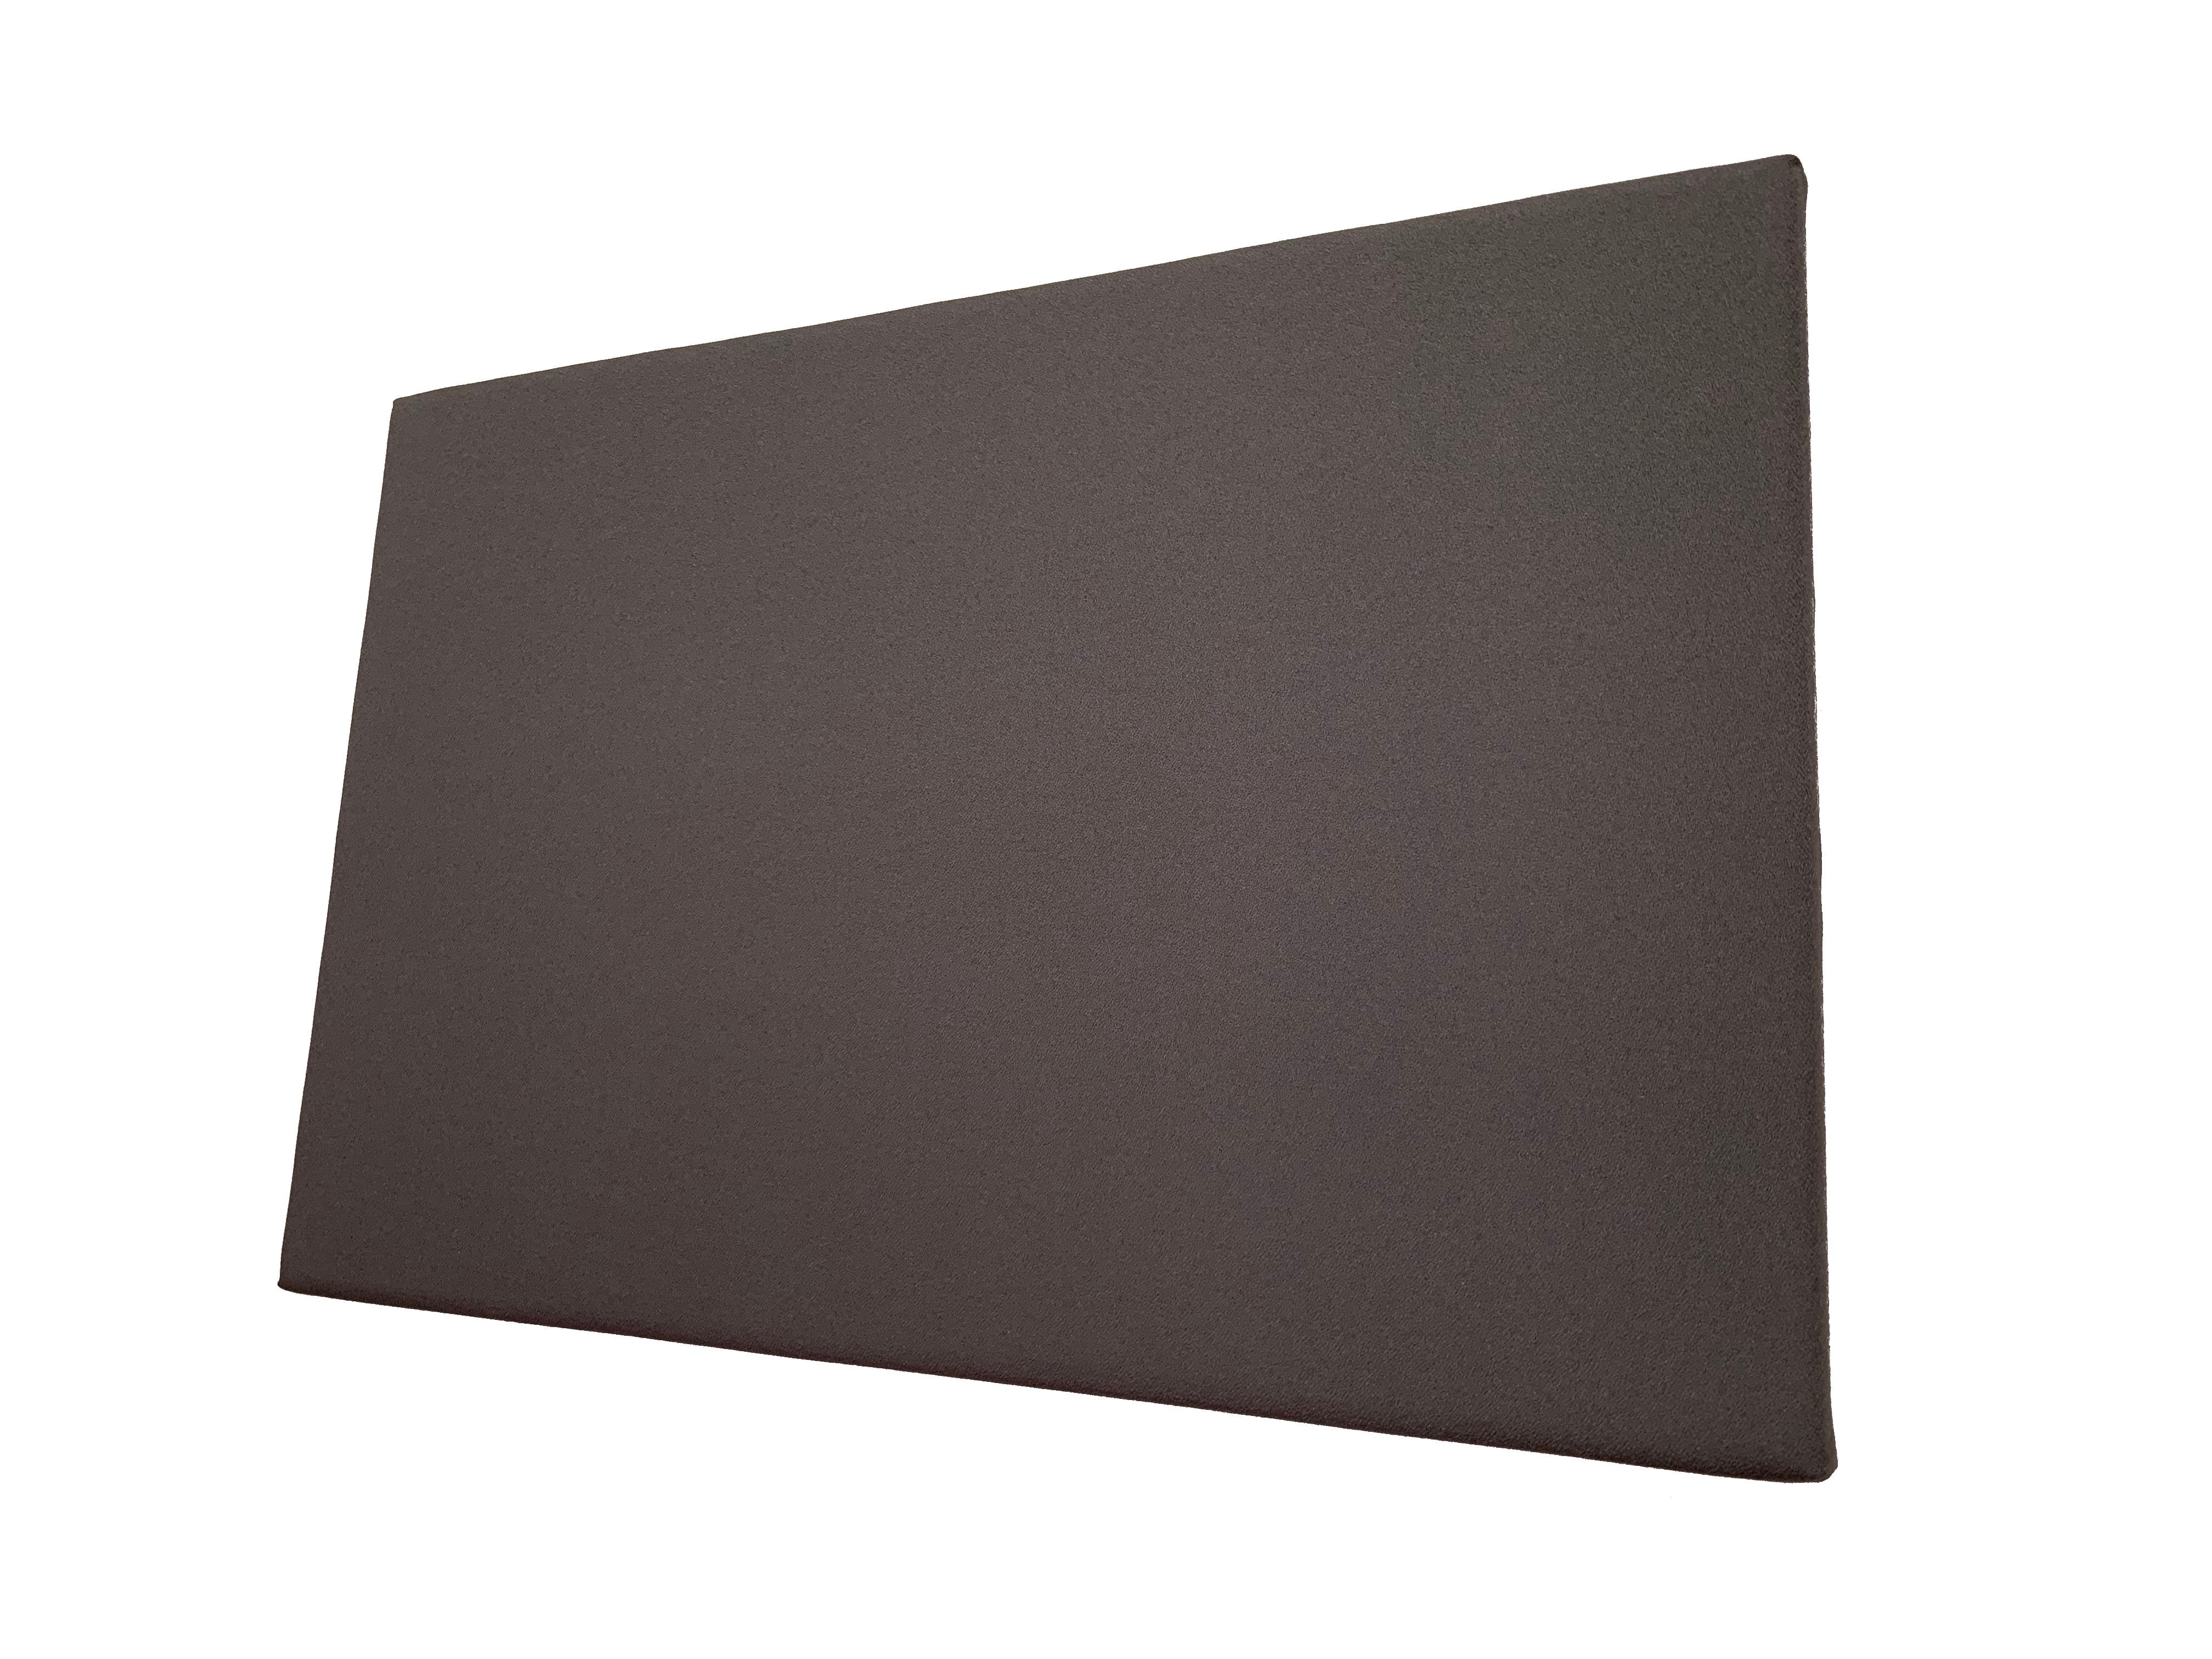 1" SoundControl Ceiling Mounted Acoustic Panel 2ft by 3ft - Advanced Acoustics